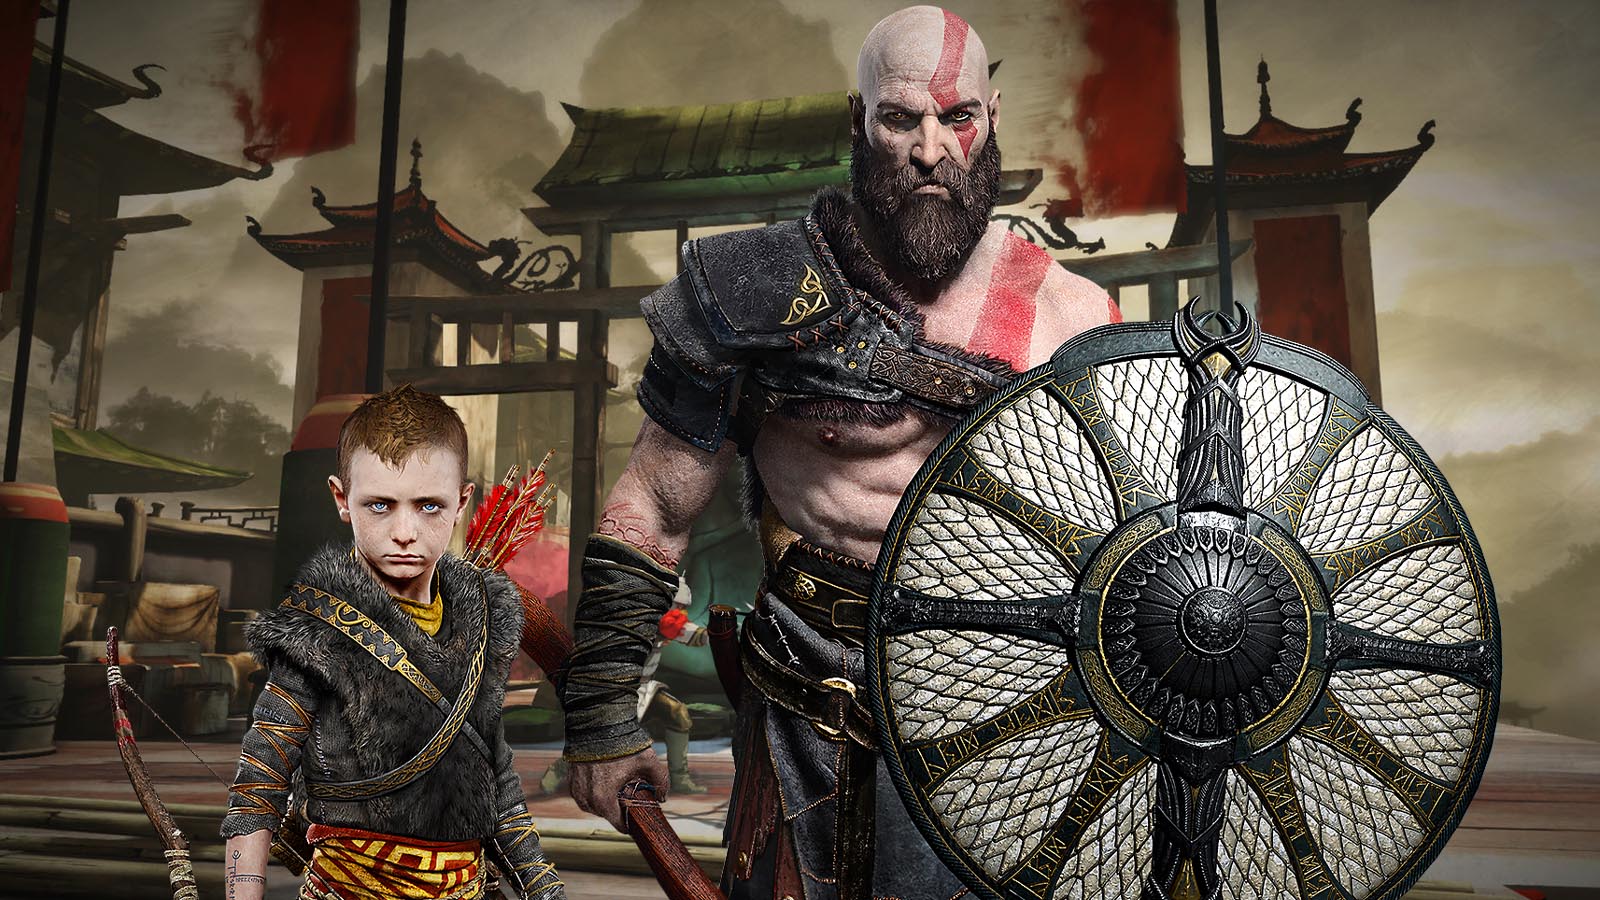 chinese god of war